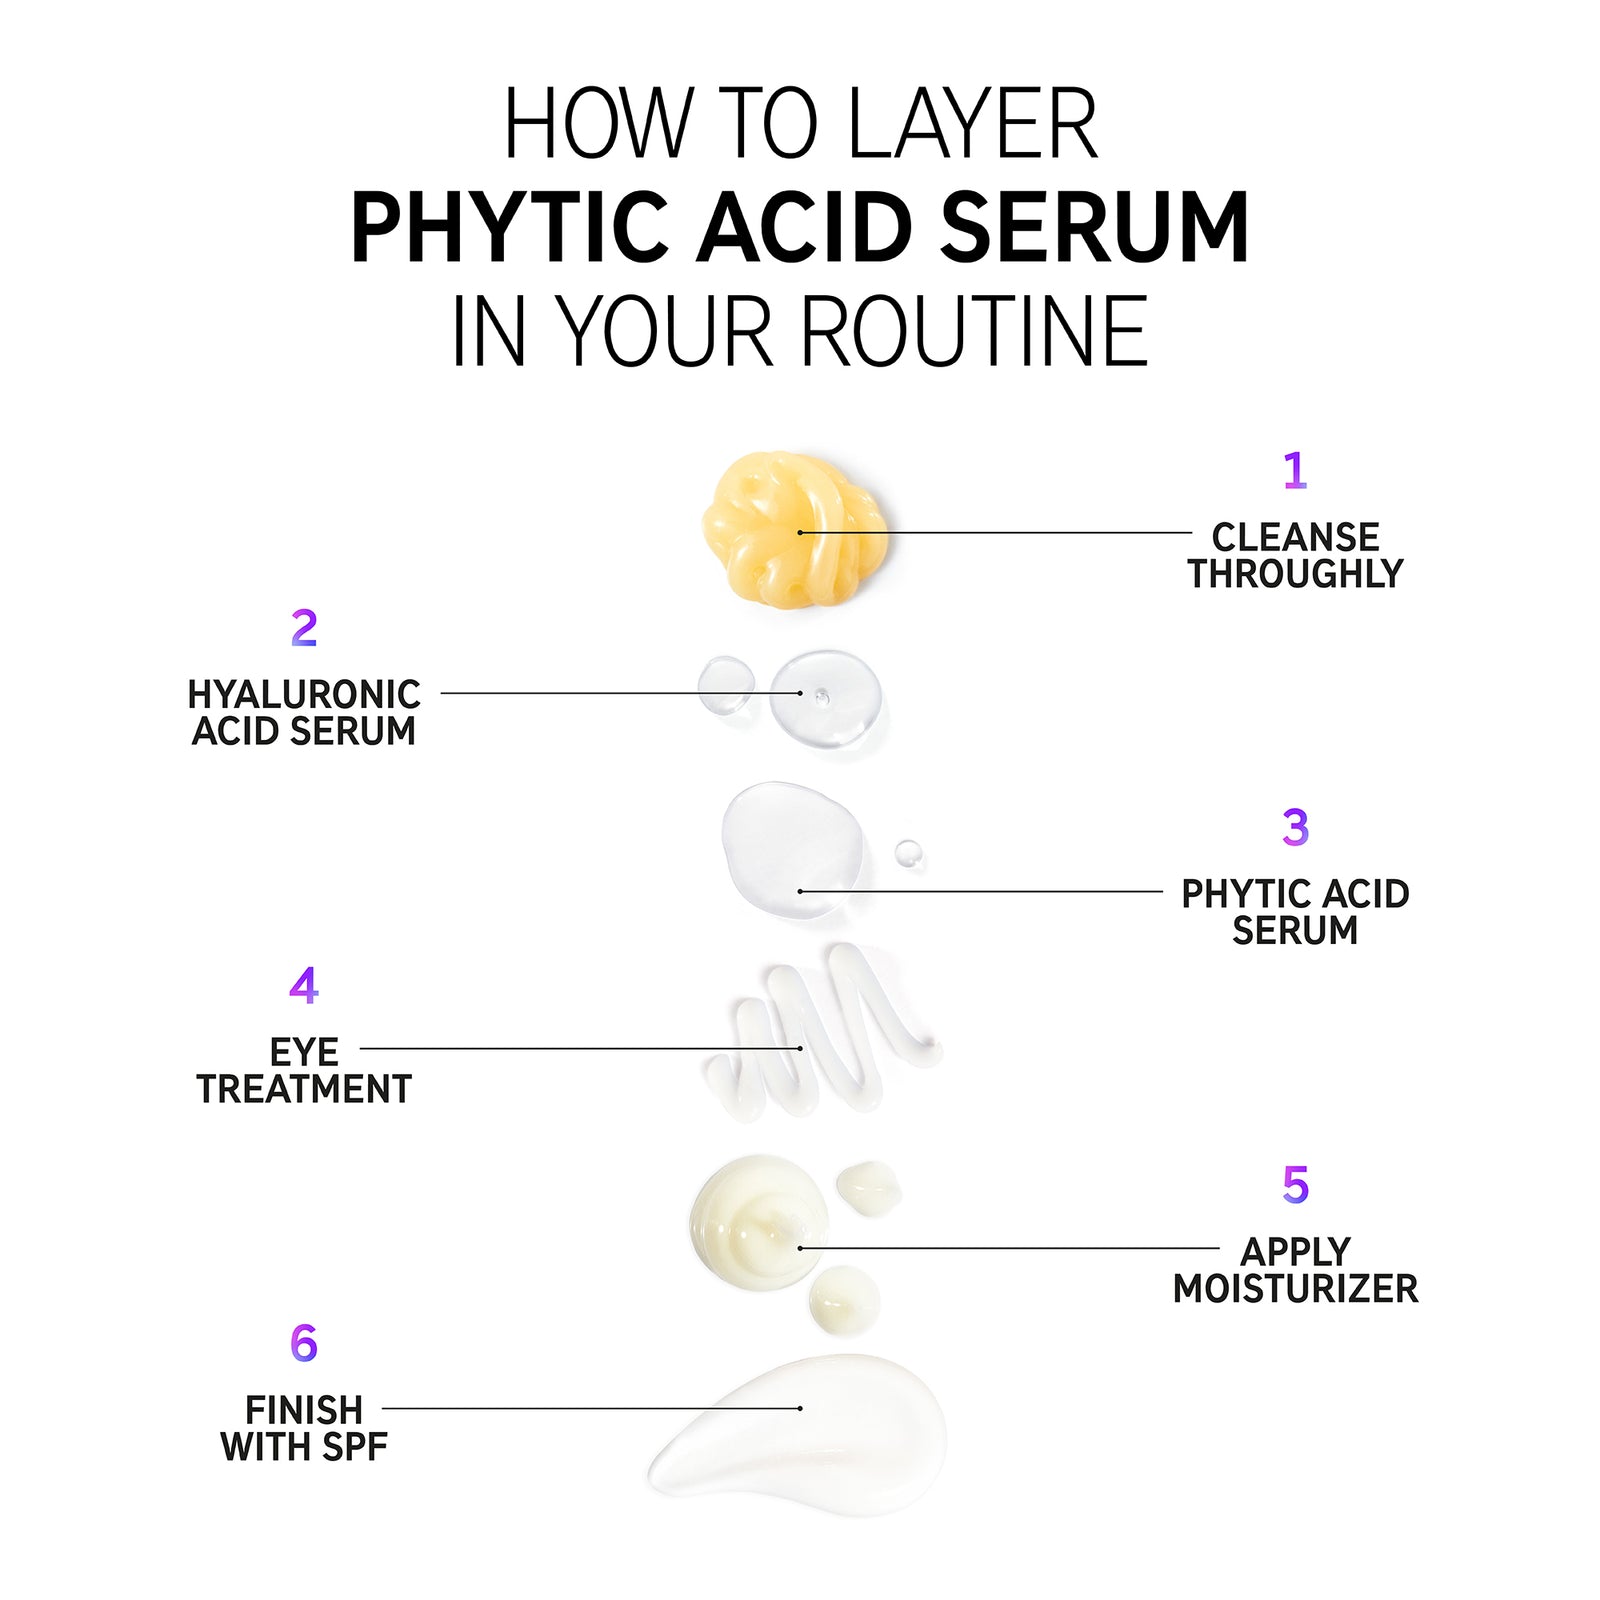 Phytic Acid Serum how to layer in your skincare routine. Step 1. Cleanse thoroughly Step 2. HA Serum Step 3. Phytic Acid Serum Step 4. Eye treatment Step 5. Apply moisturizer Step 6. Finish with SPF